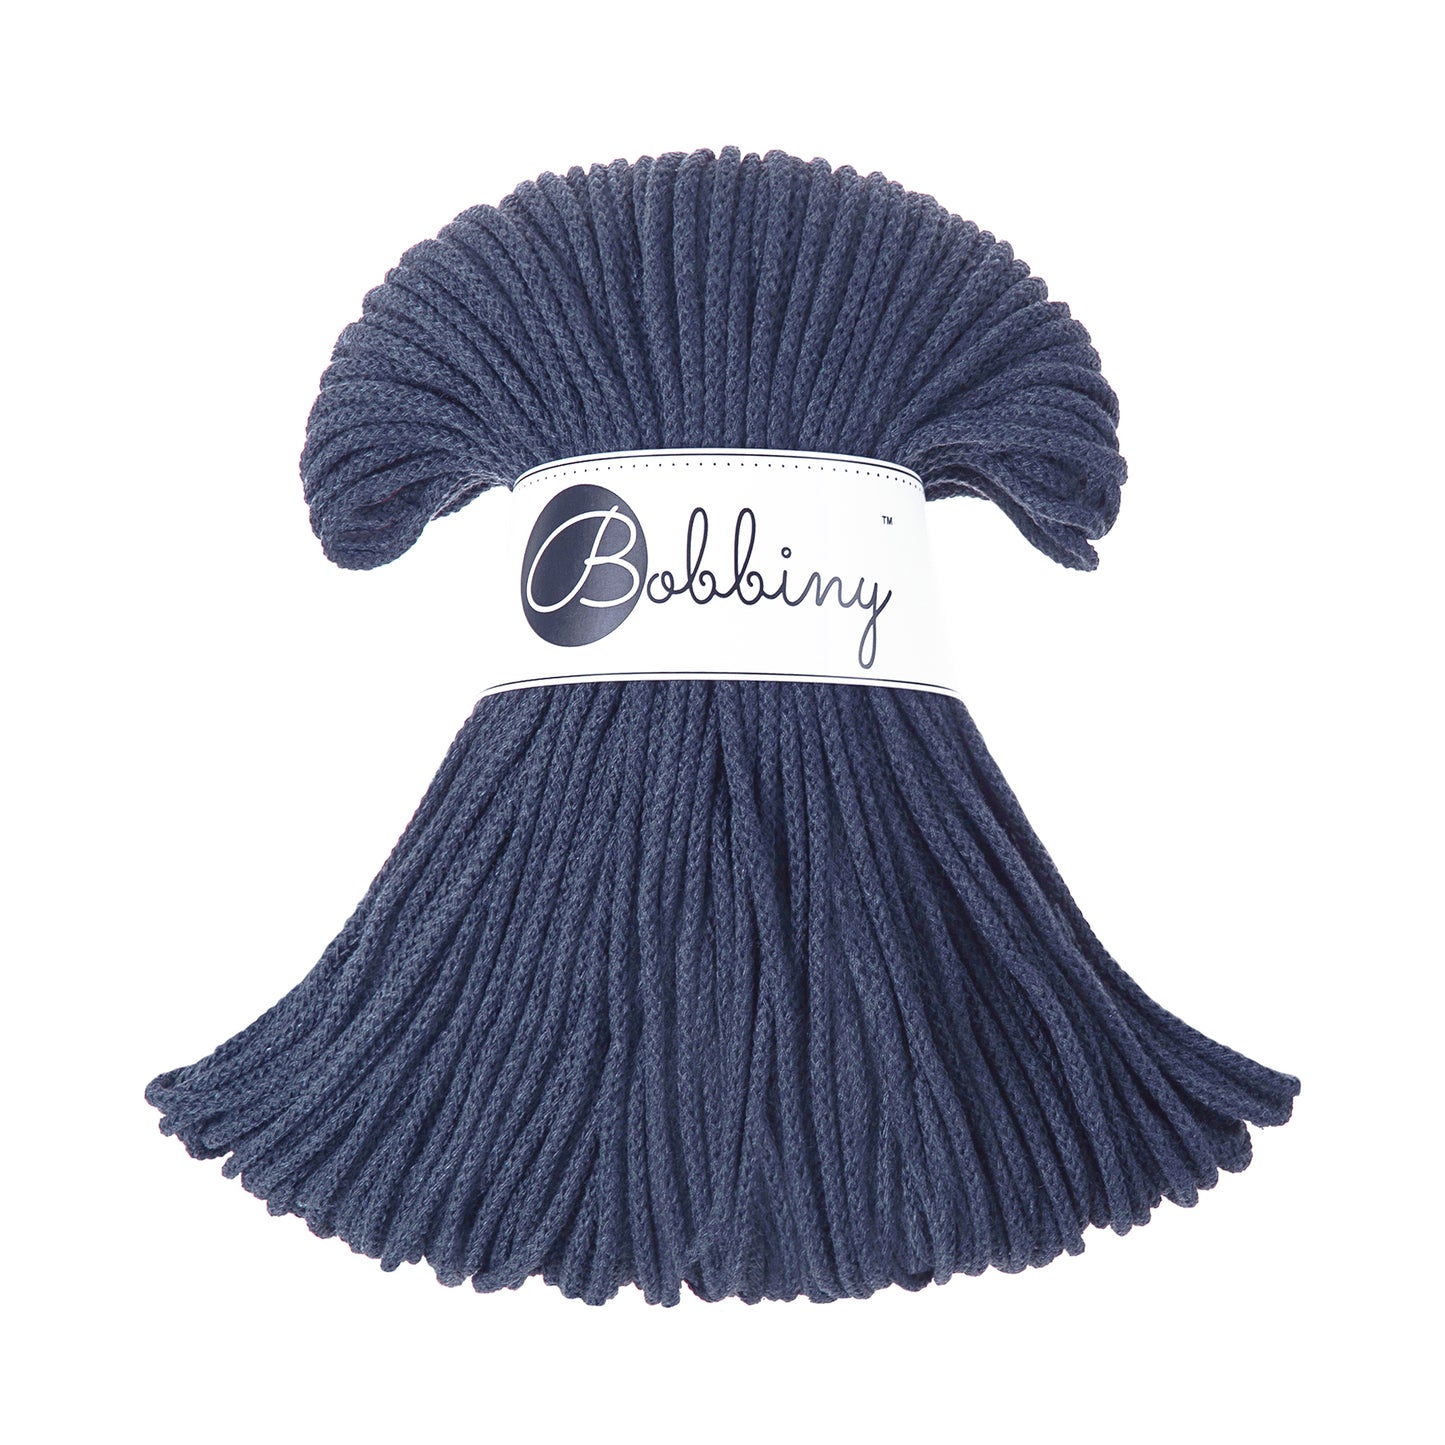 JEANS Braided cord 3mm